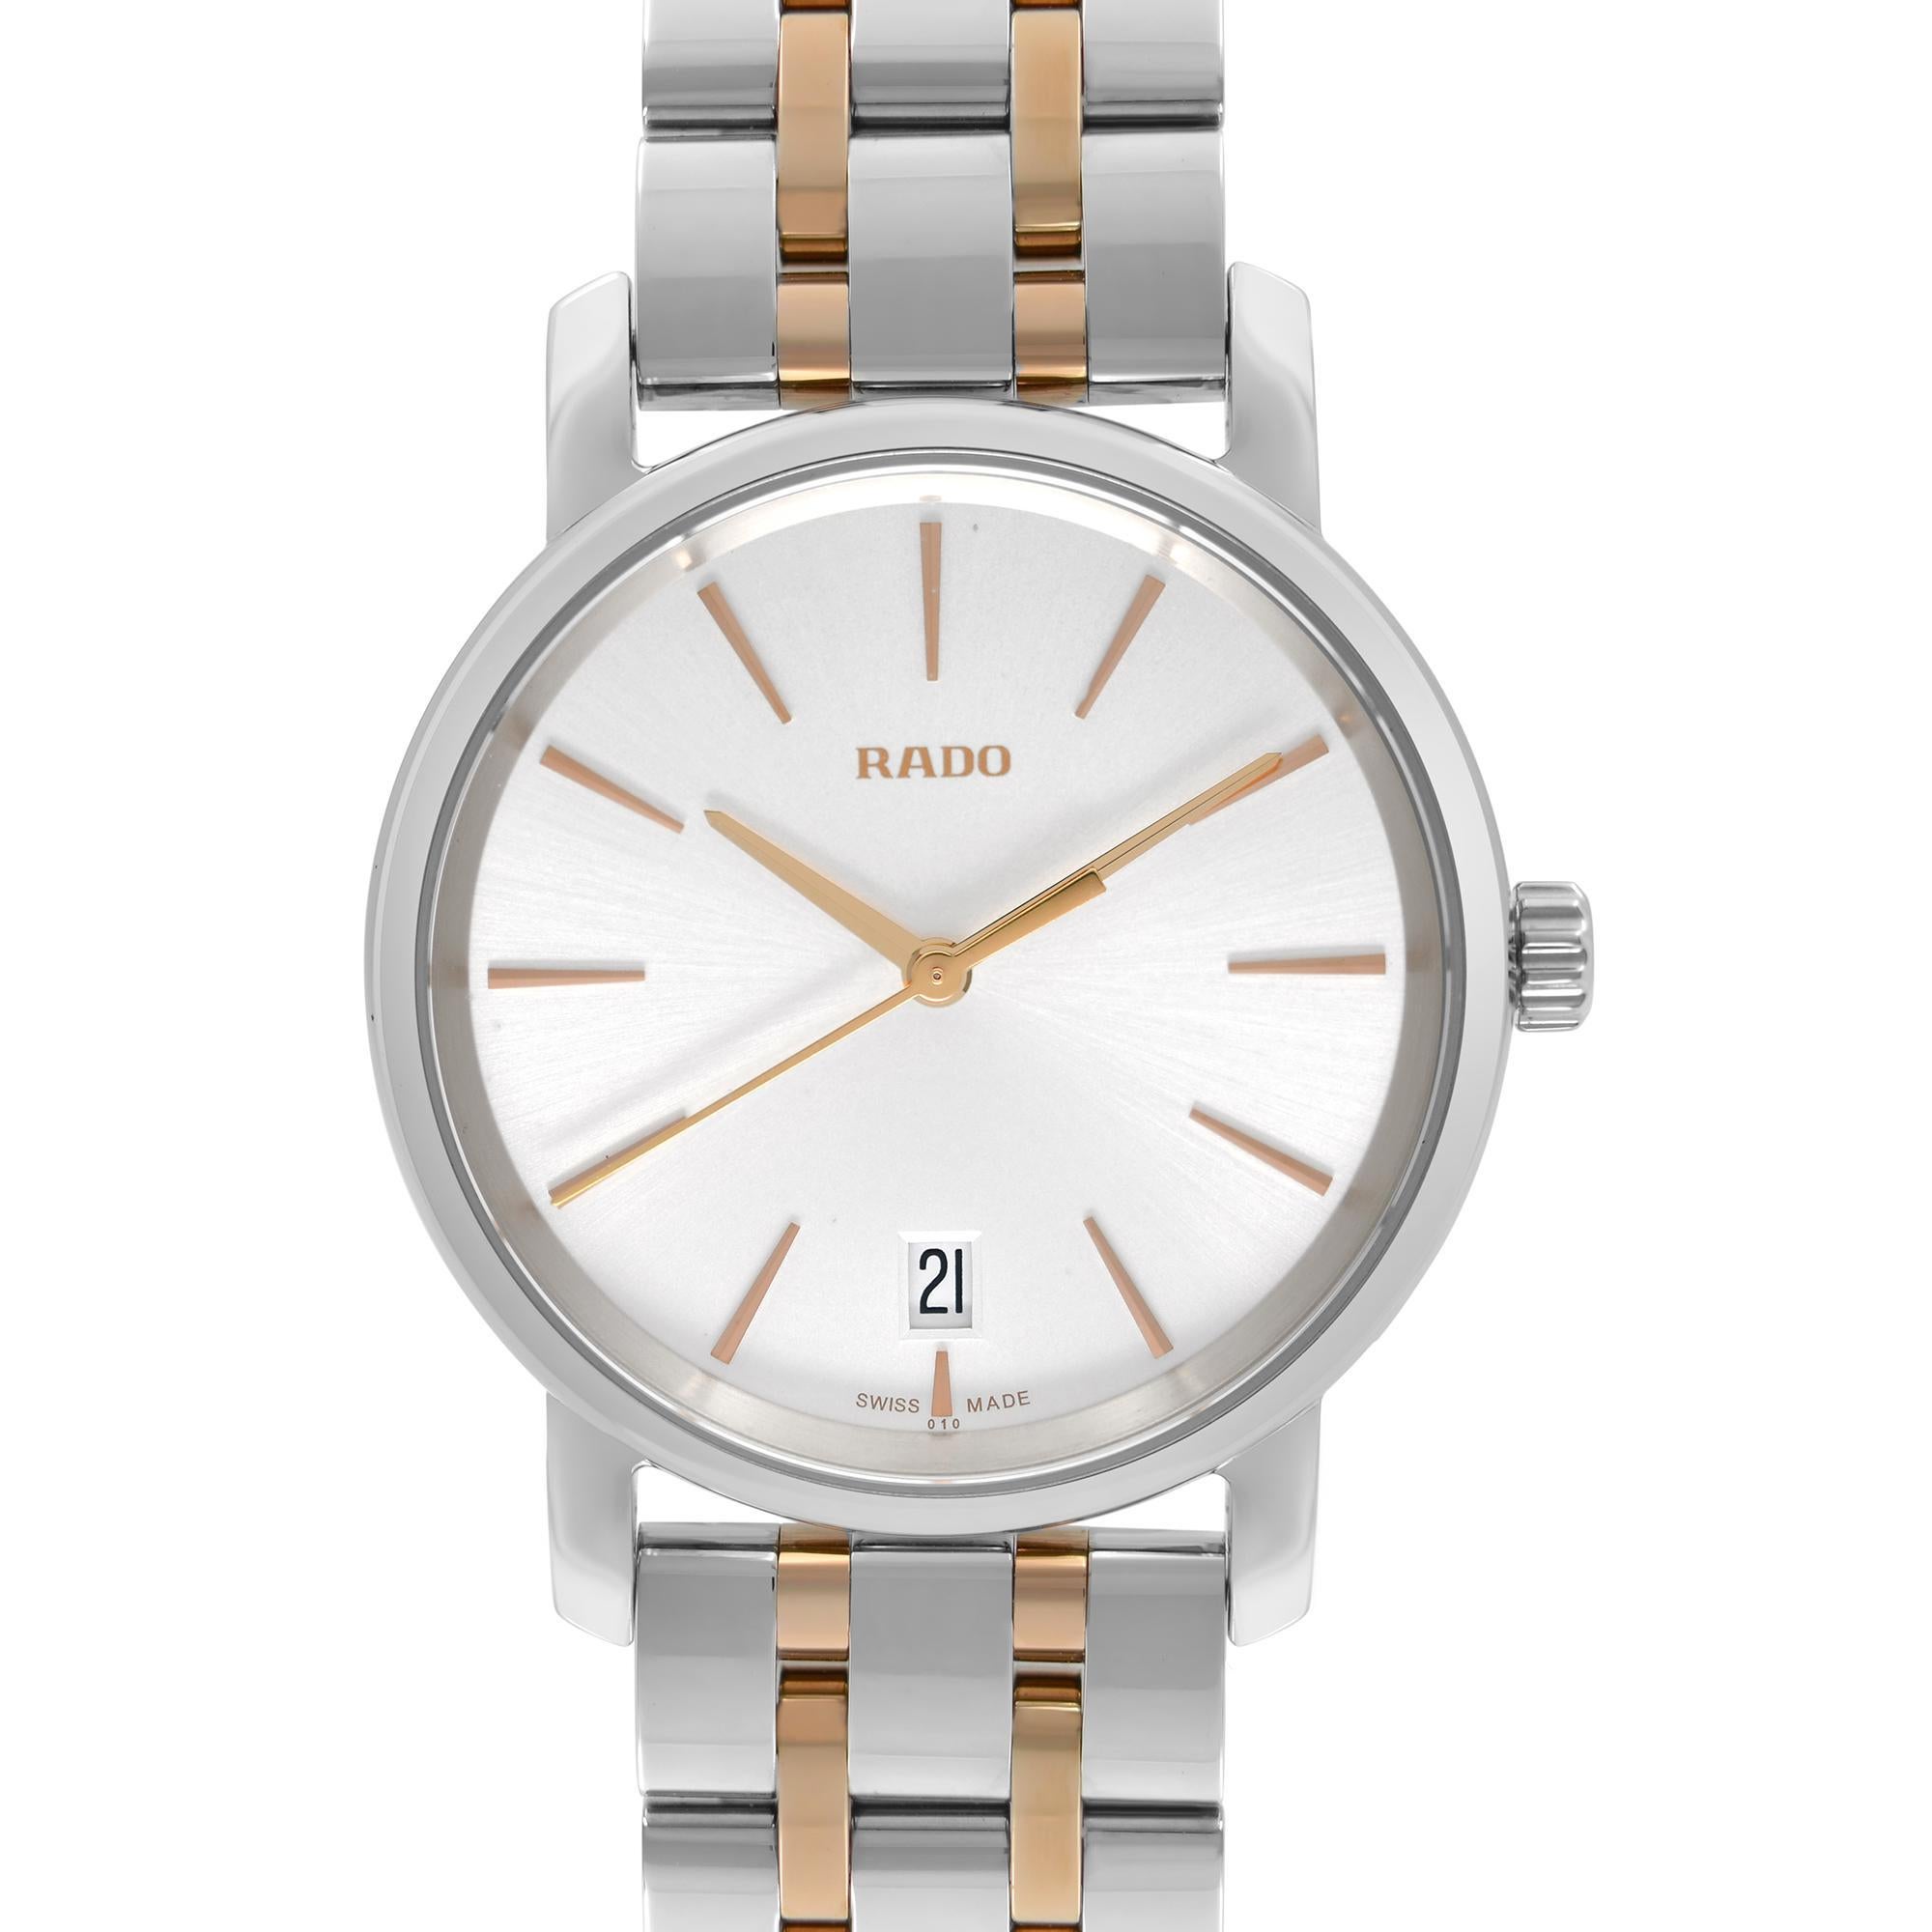 Display Model Rado DiaMaster 33mm Steel Two-Tone Silver Dial Quartz Ladies Watch R14089103. This Beautiful Timepiece is Powered by a Quartz (Battery) Movement and Features: Round Stainless Steel Case with a with a Two-Tone Bracelet, Fixed Stainless